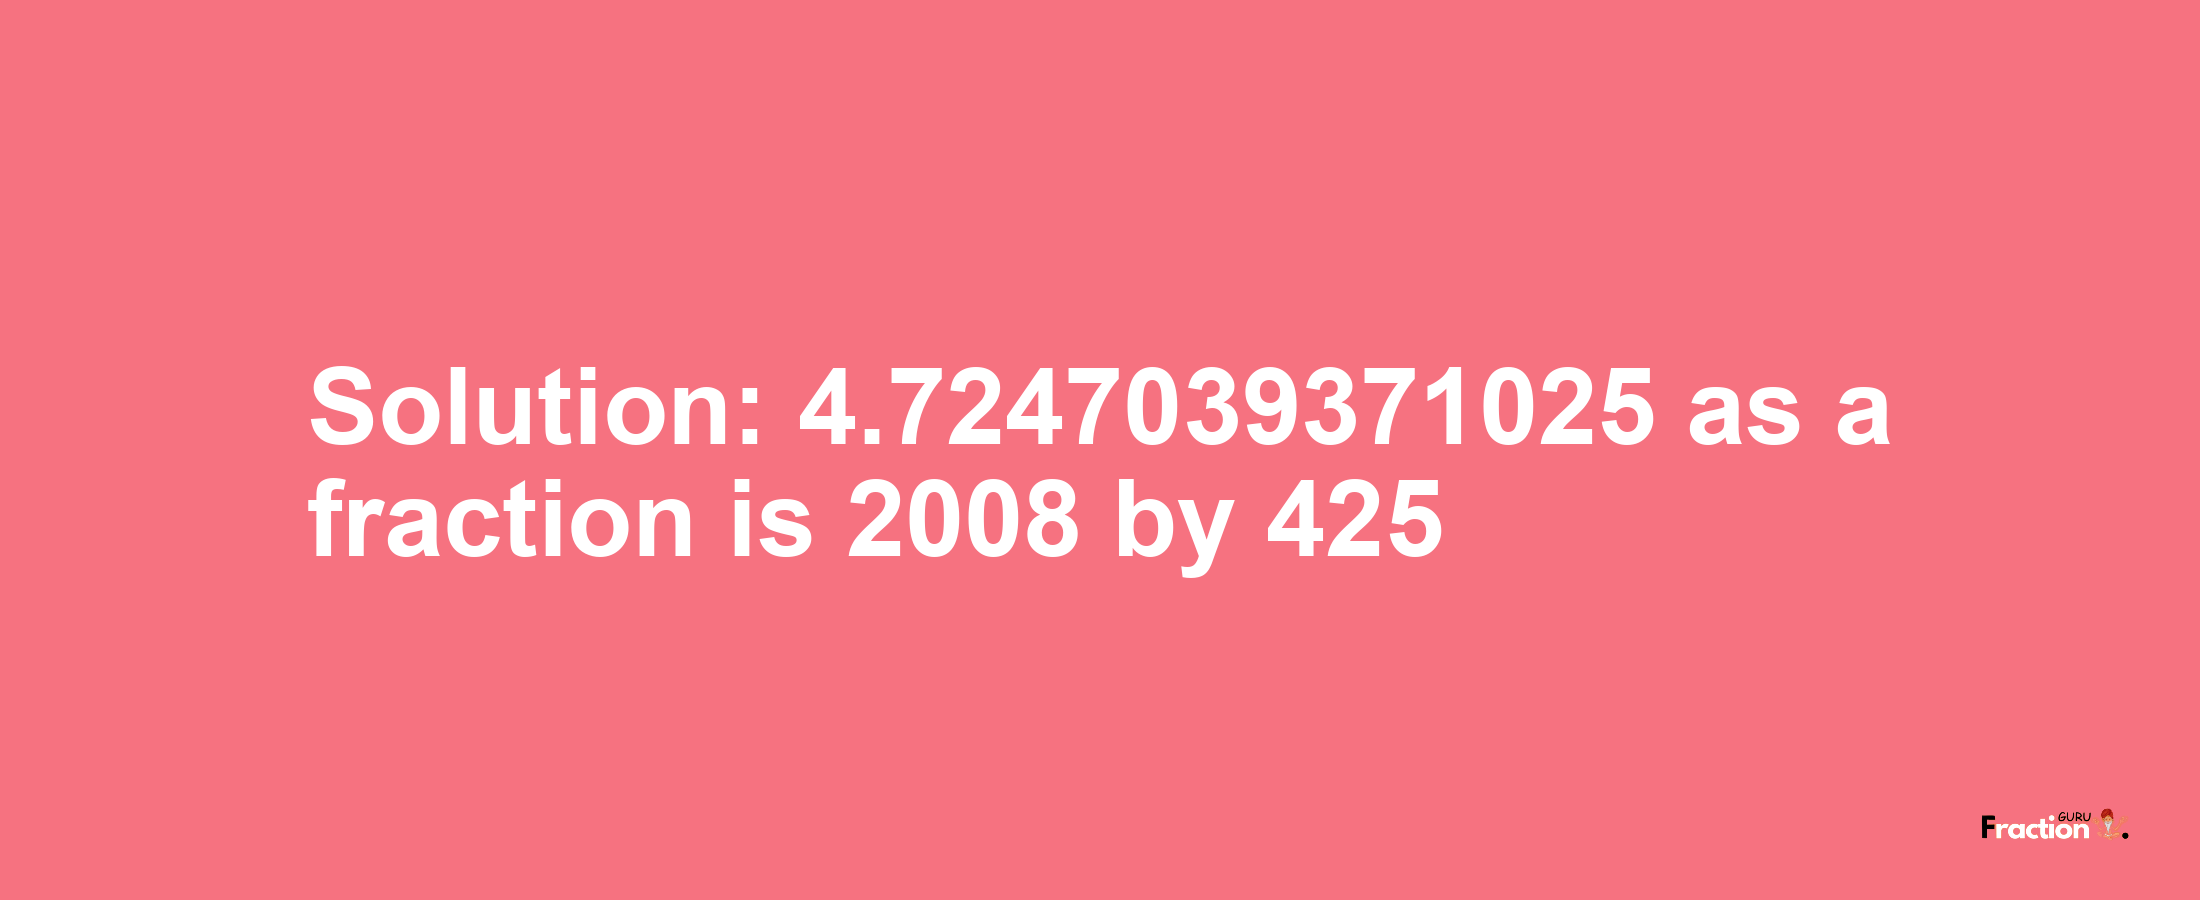 Solution:4.7247039371025 as a fraction is 2008/425